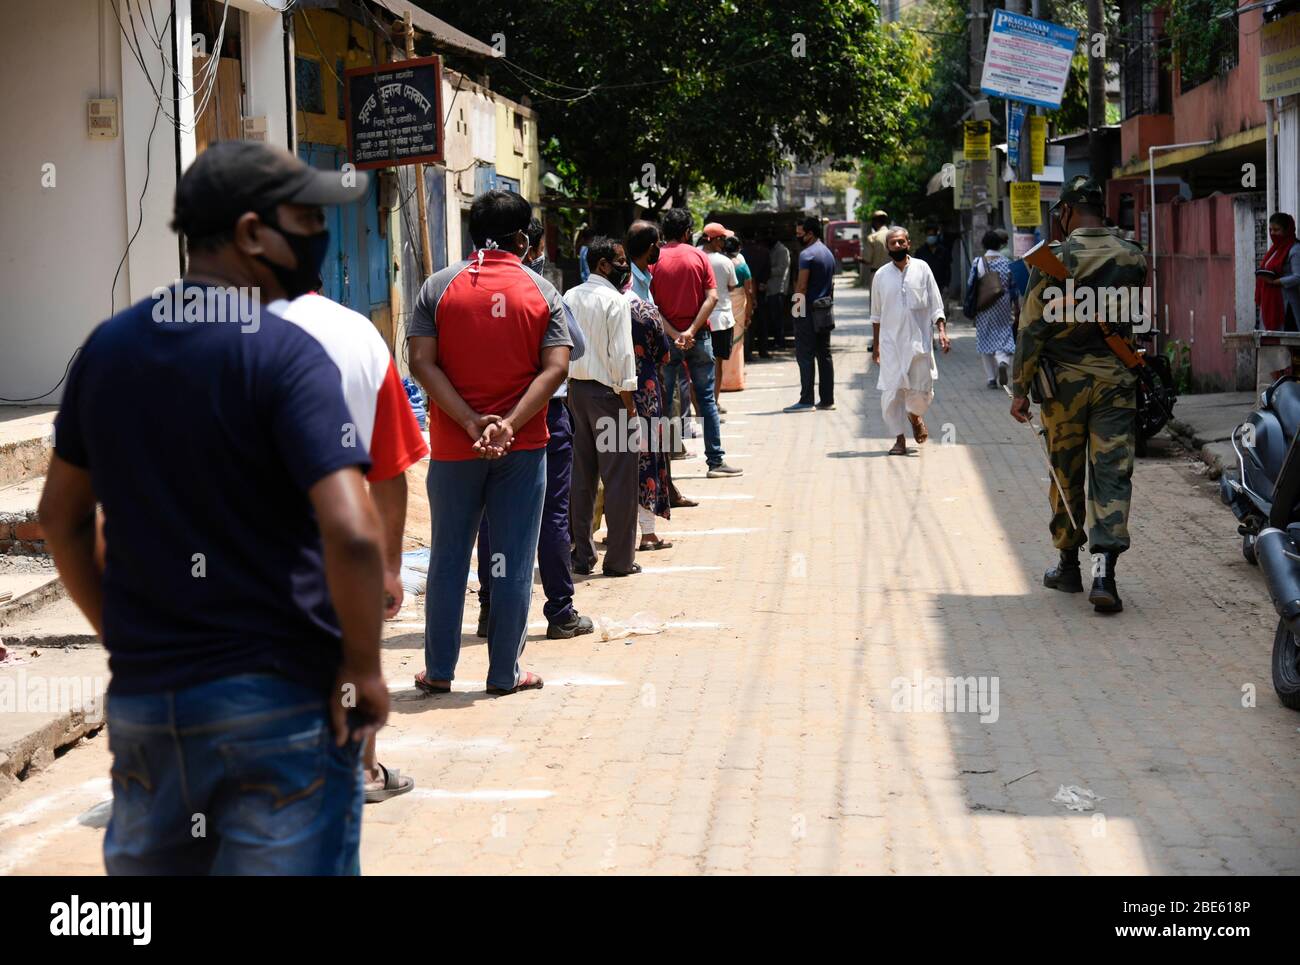 Guwahati, Assam, India. 10 April 2020. People are in que to buy chicken, during the nationwide lockdown to curb the spread of coronavirus, in Guwahati, Assam, India on Sunday, April 12, 2020. Credit: David Talukdar/Alamy Live News Stock Photo